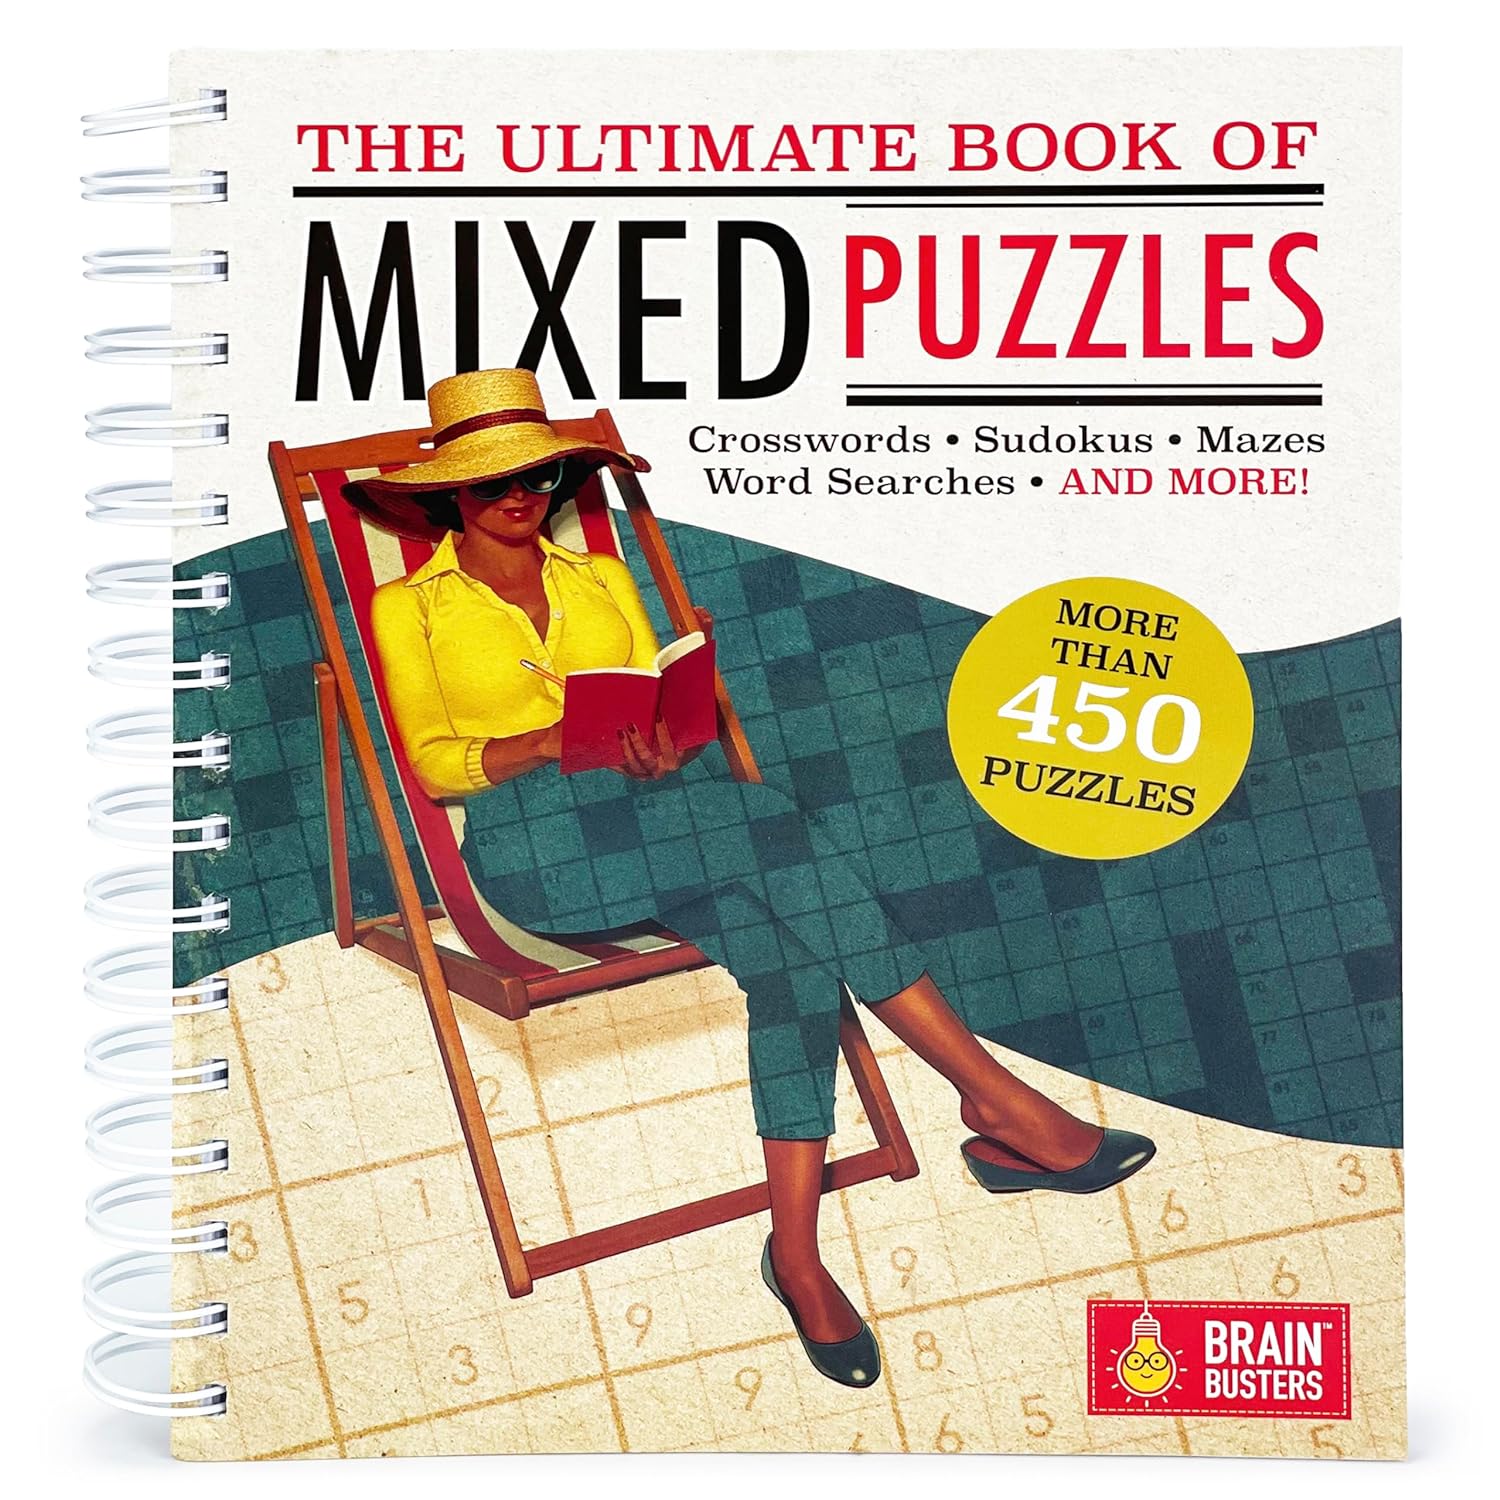 Ultimate Book of Mixed Puzzles